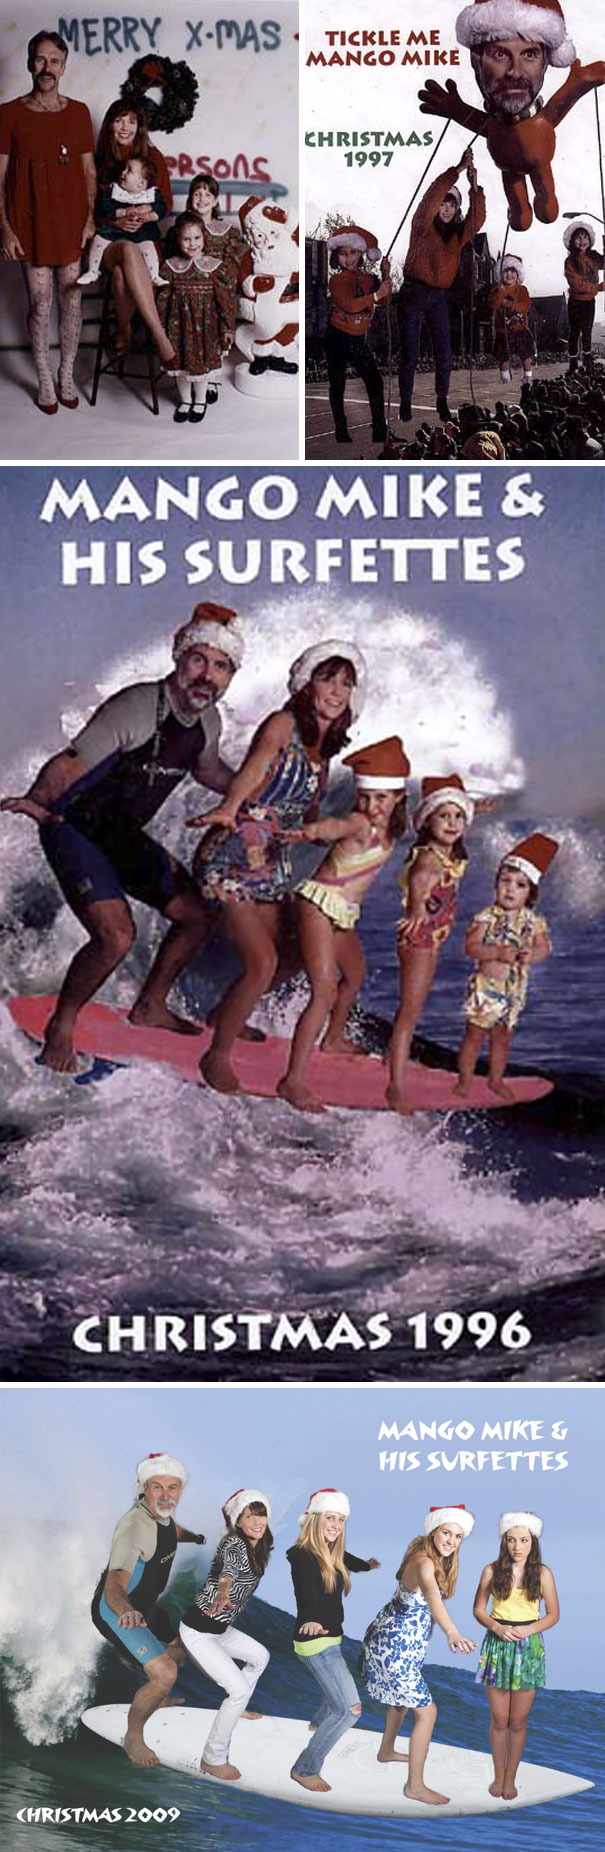 My Dad Would Send Out Hundreds Of Christmas Cards To The Community/Family. His Favorite Time Of Year To Humiliate Us All. We Recreated The Surfing Christmas Card In 2009